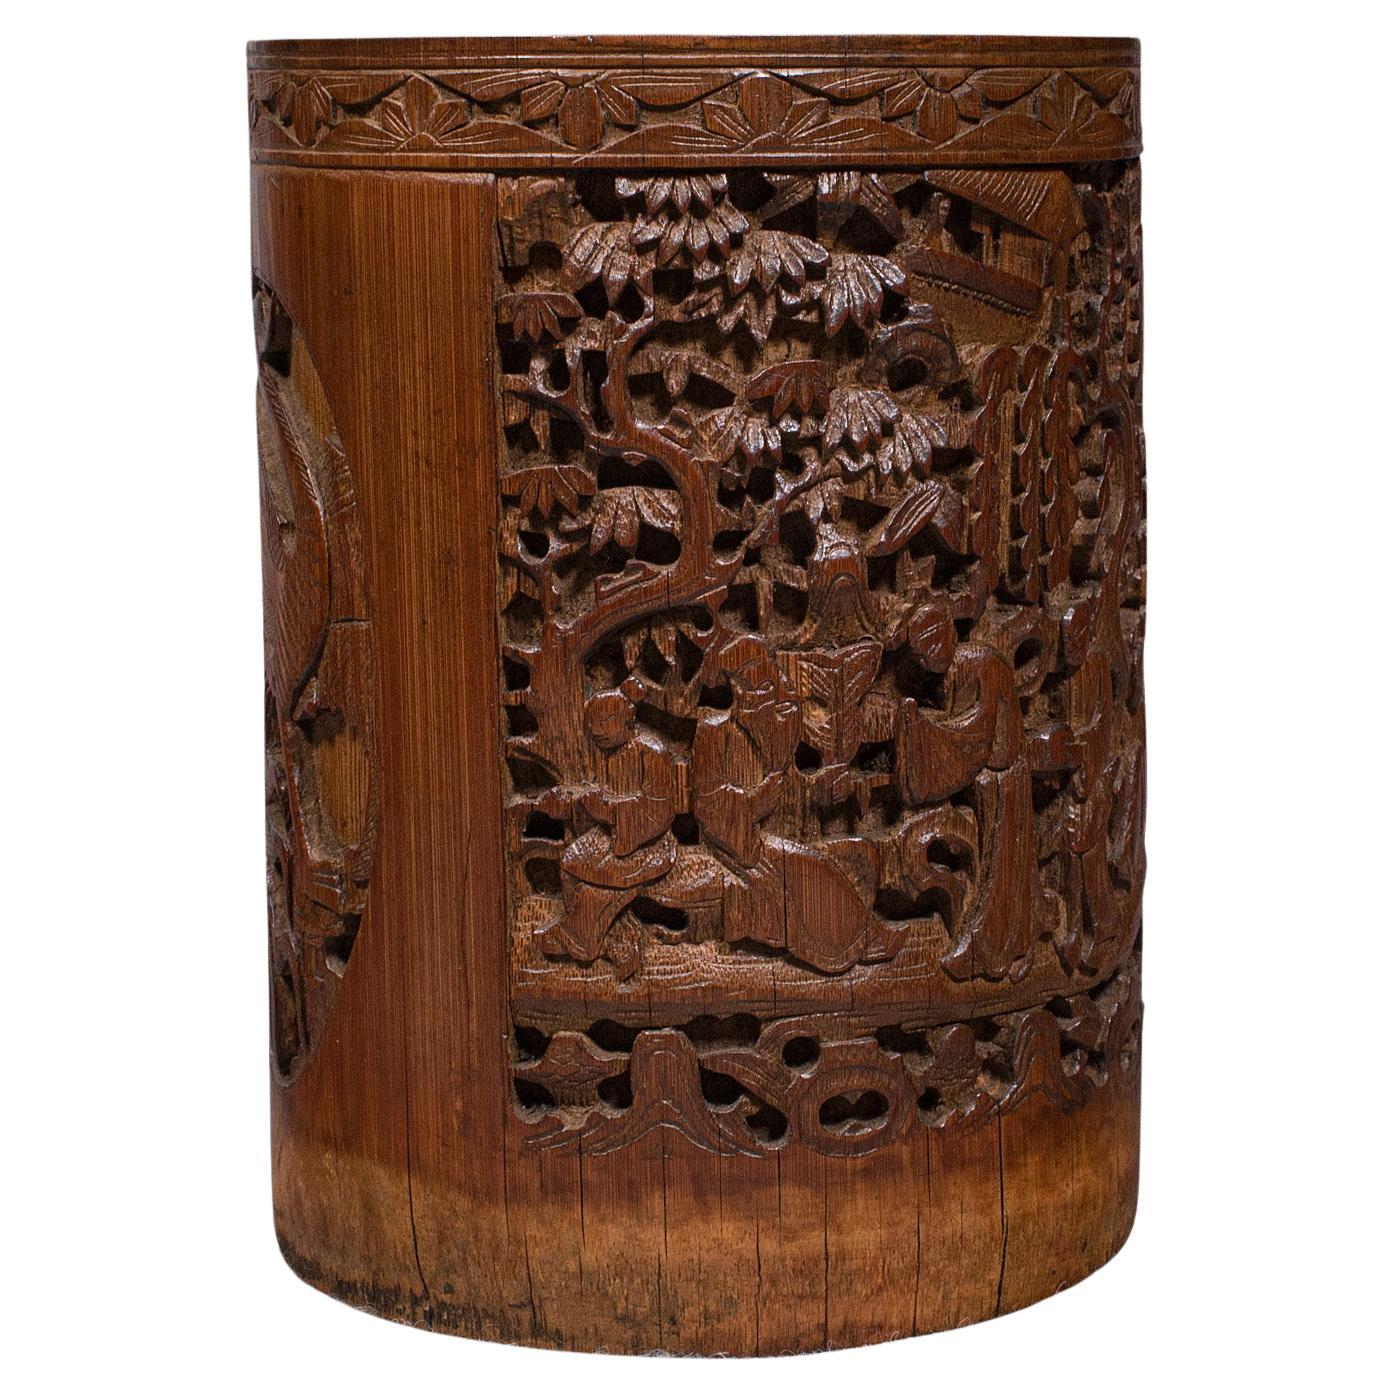 Antique Artist's Brush Pot, Chinese, Carved Bamboo, Treen, Victorian, circa 1900